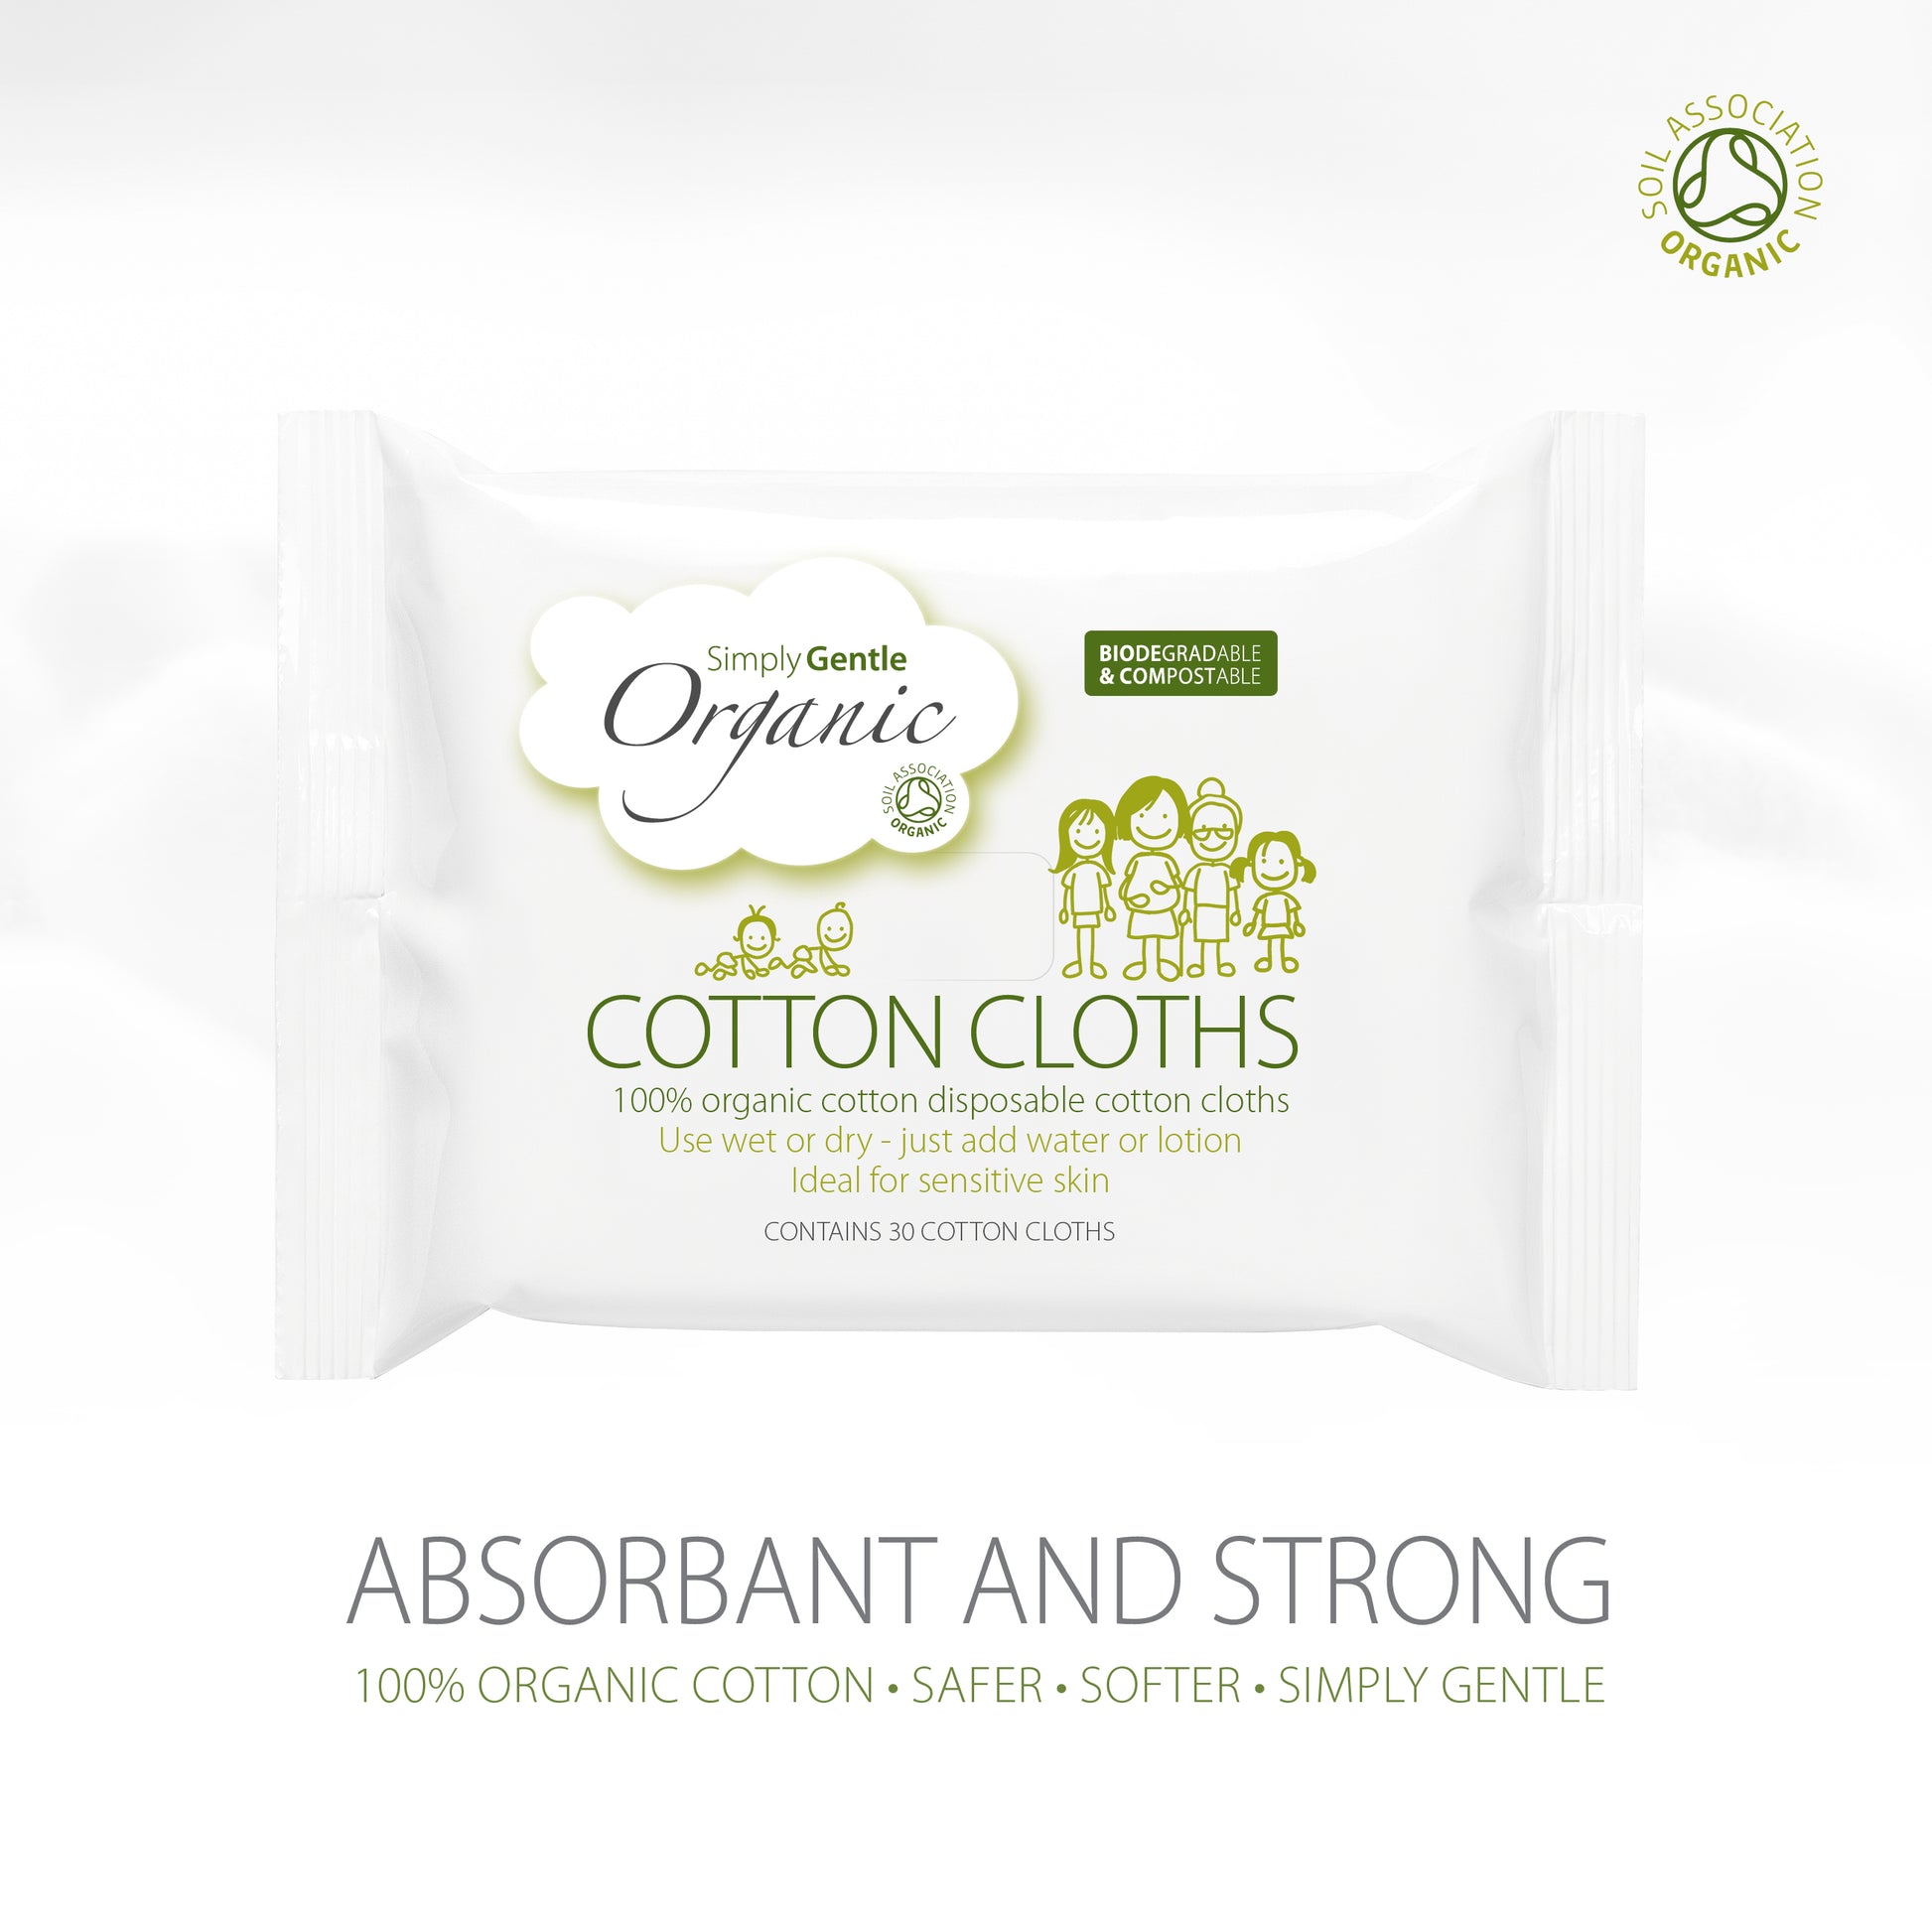 Disposable Organic Cotton Cloths, 100% organic cotton and biodegradable. The absorbant and strong clothes can be used dry or wet. Ideal for sensitive skin, not impregnated - use with your regular cleanser, skin tonic or face wash.1 00% organic cotton wool. Soil Association approved.